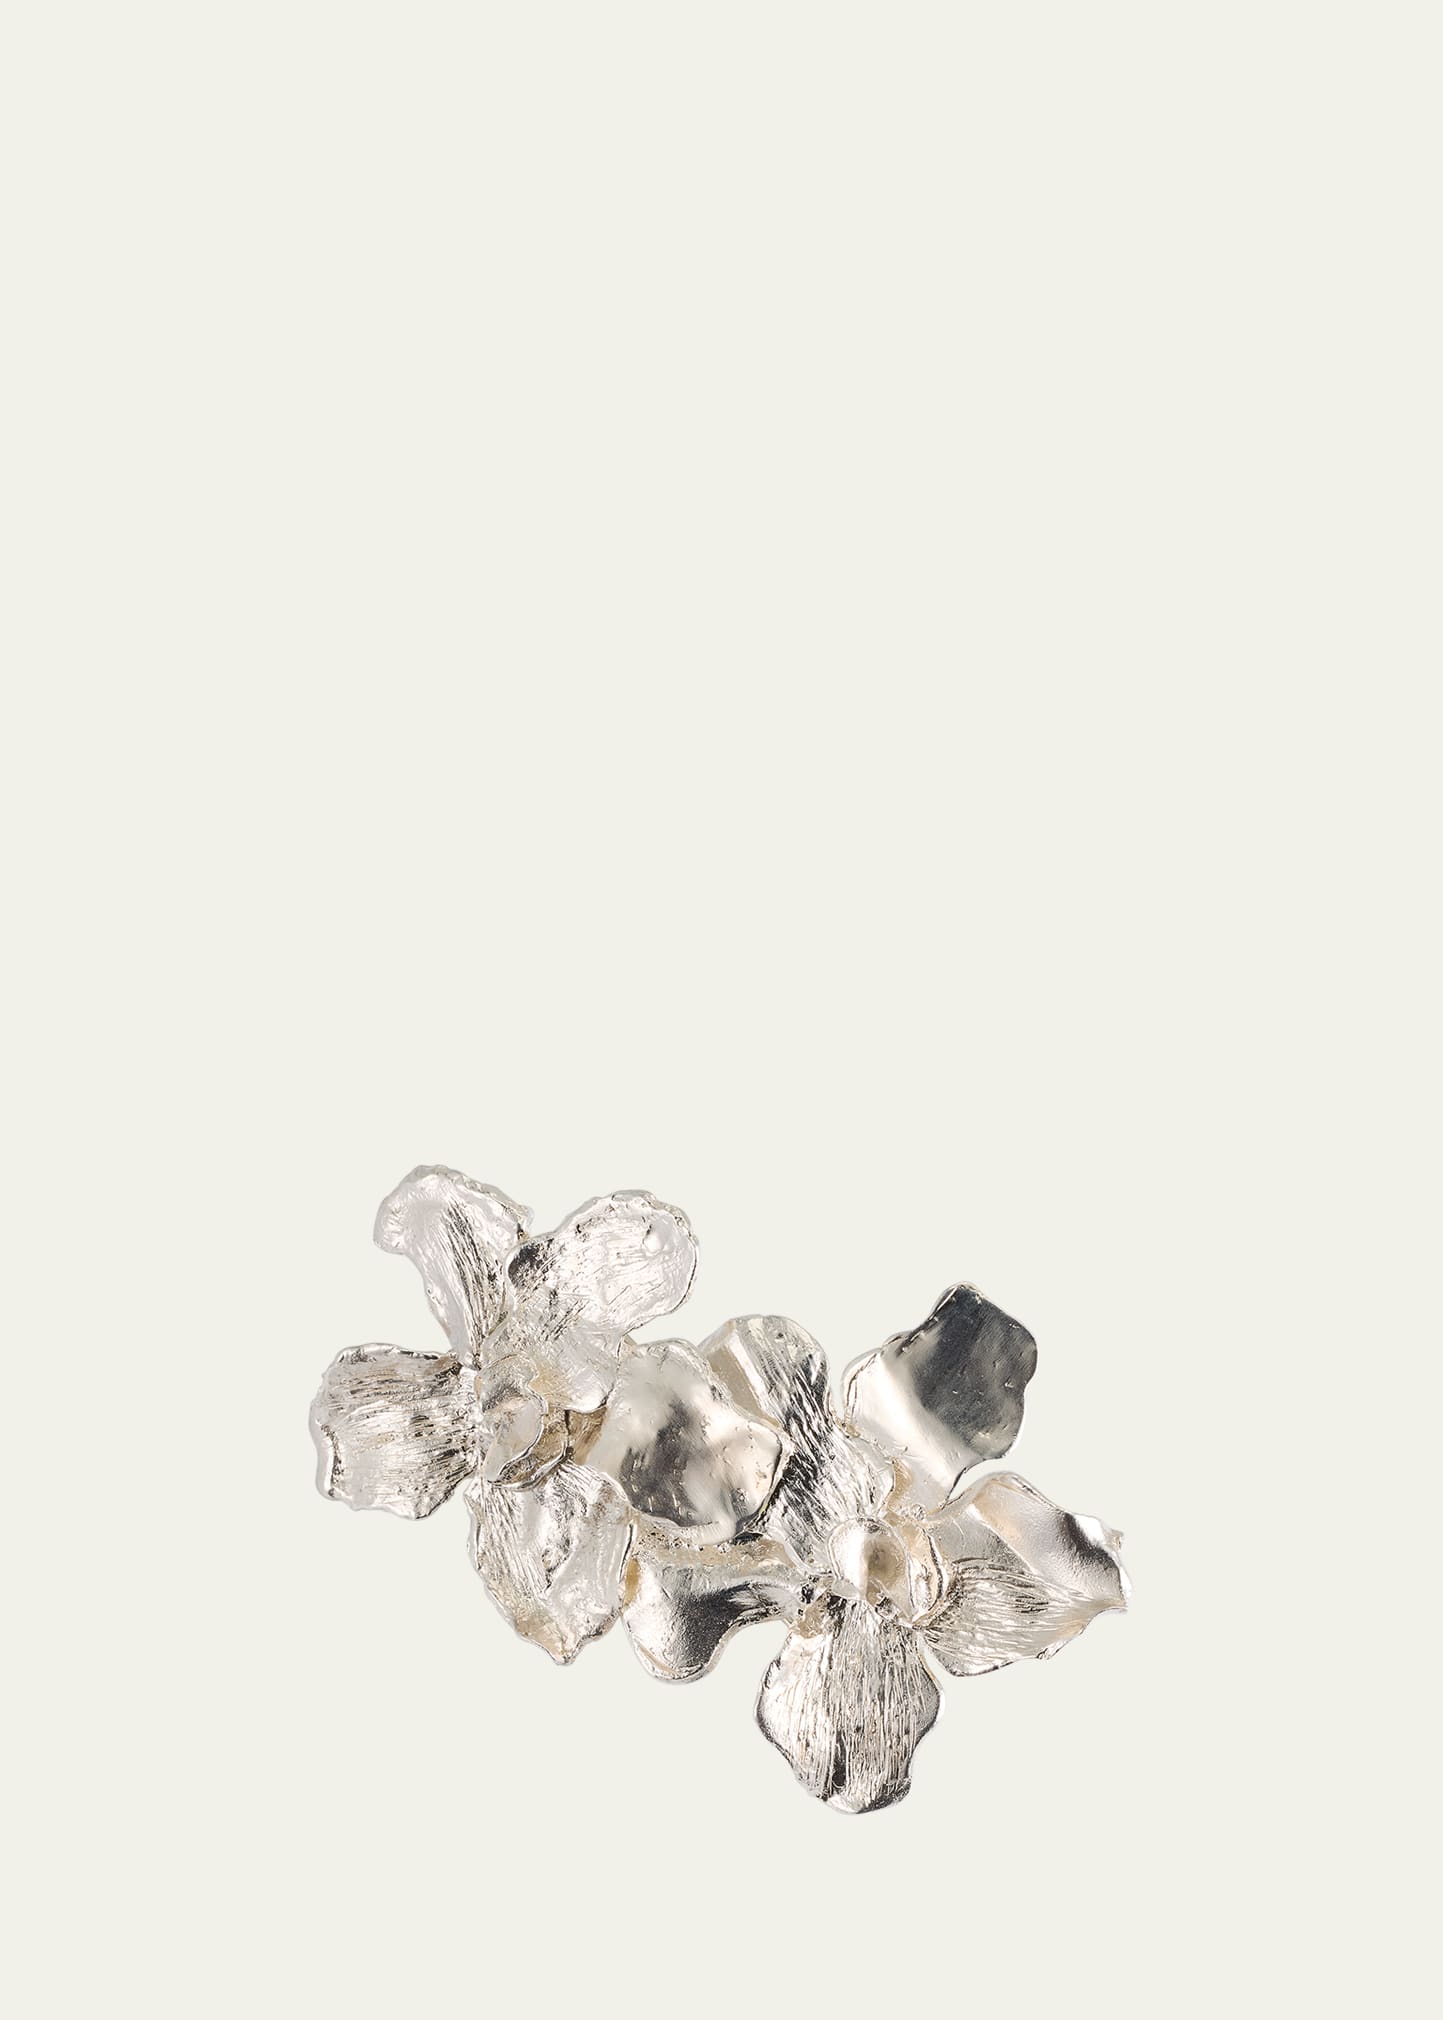 Double Flower Brooch with Black Diamonds